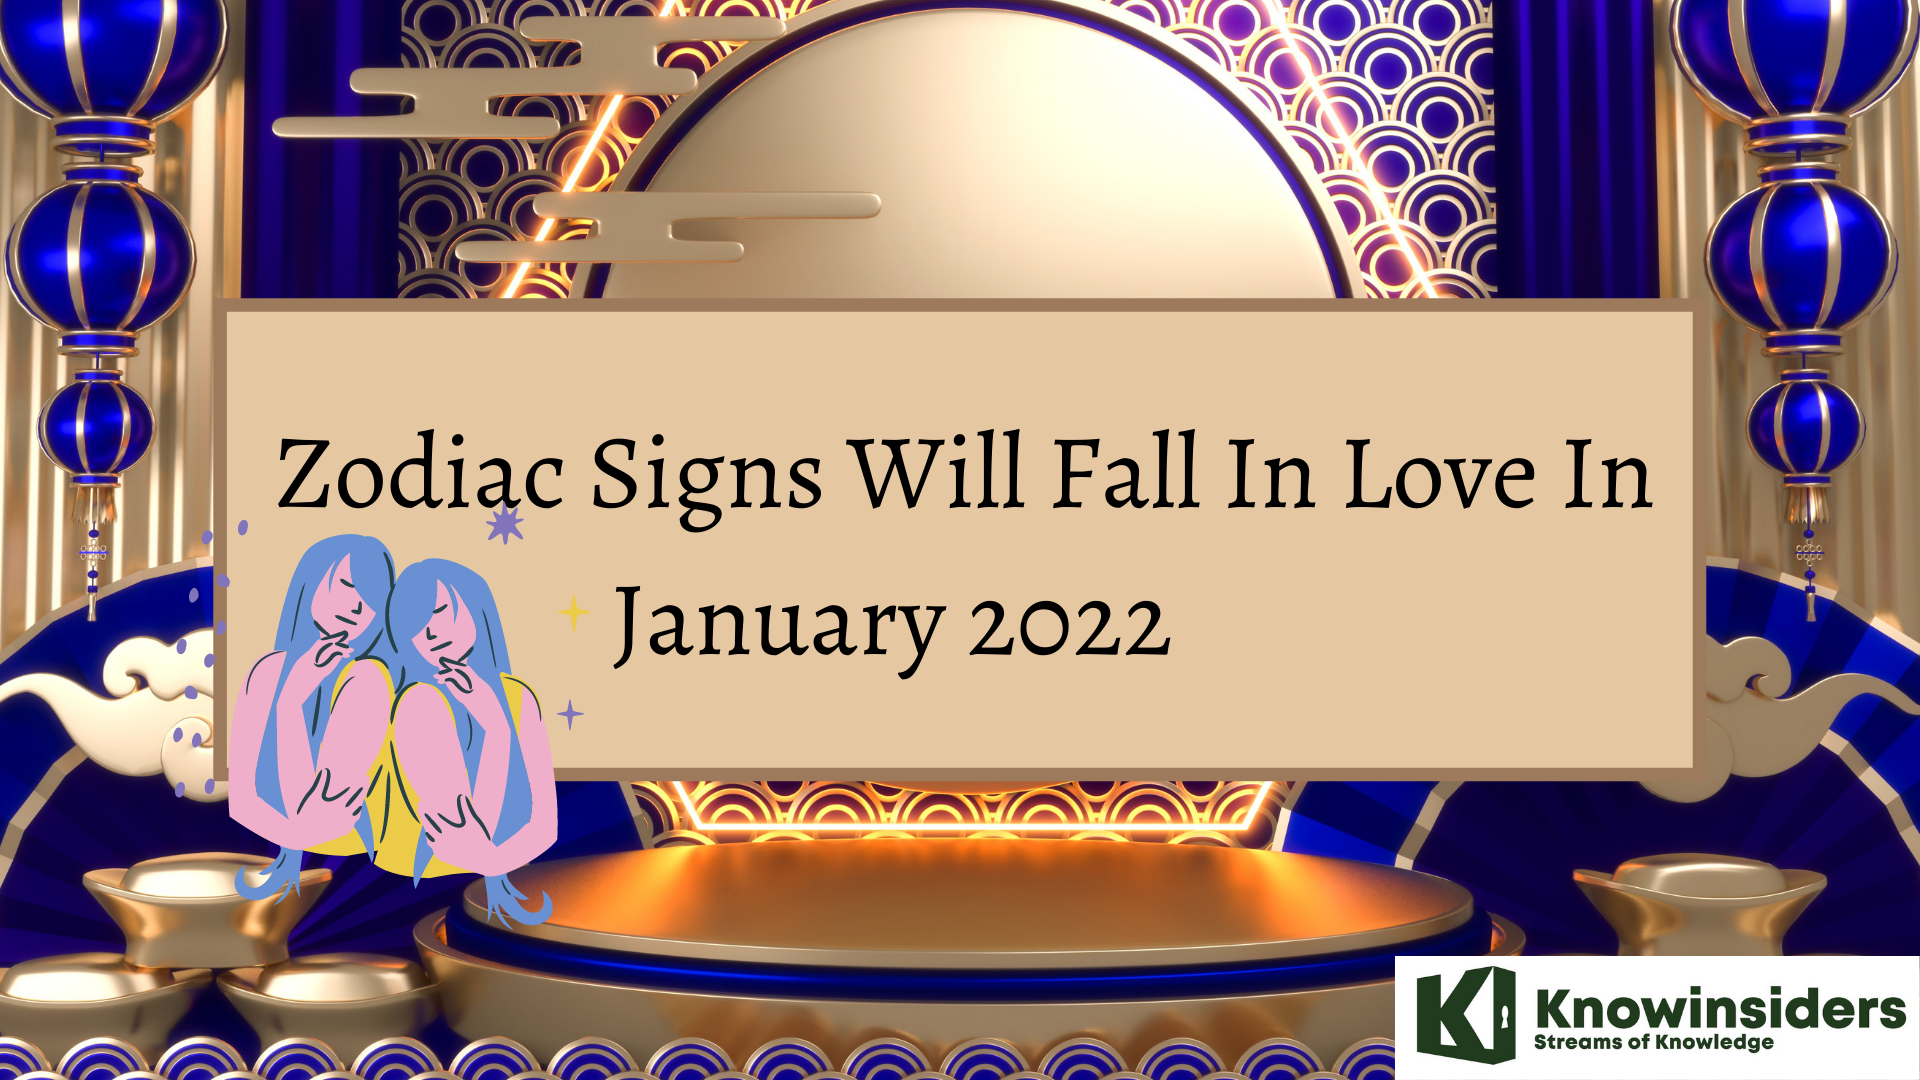 Zodic Signs Will Fall In Love In January 2022